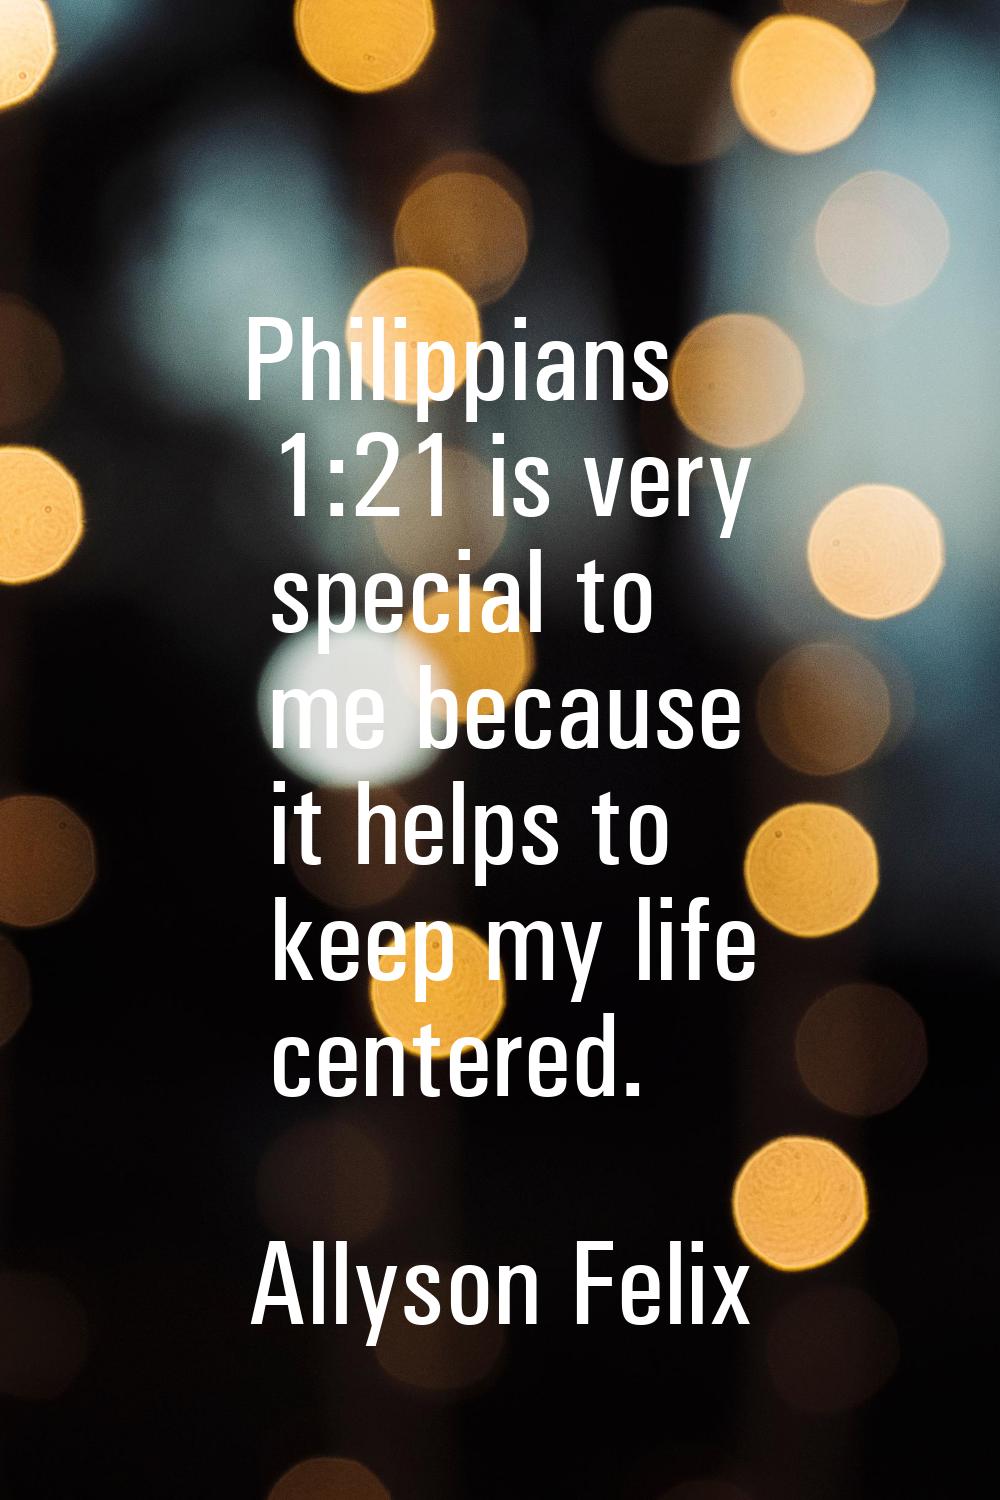 Philippians 1:21 is very special to me because it helps to keep my life centered.